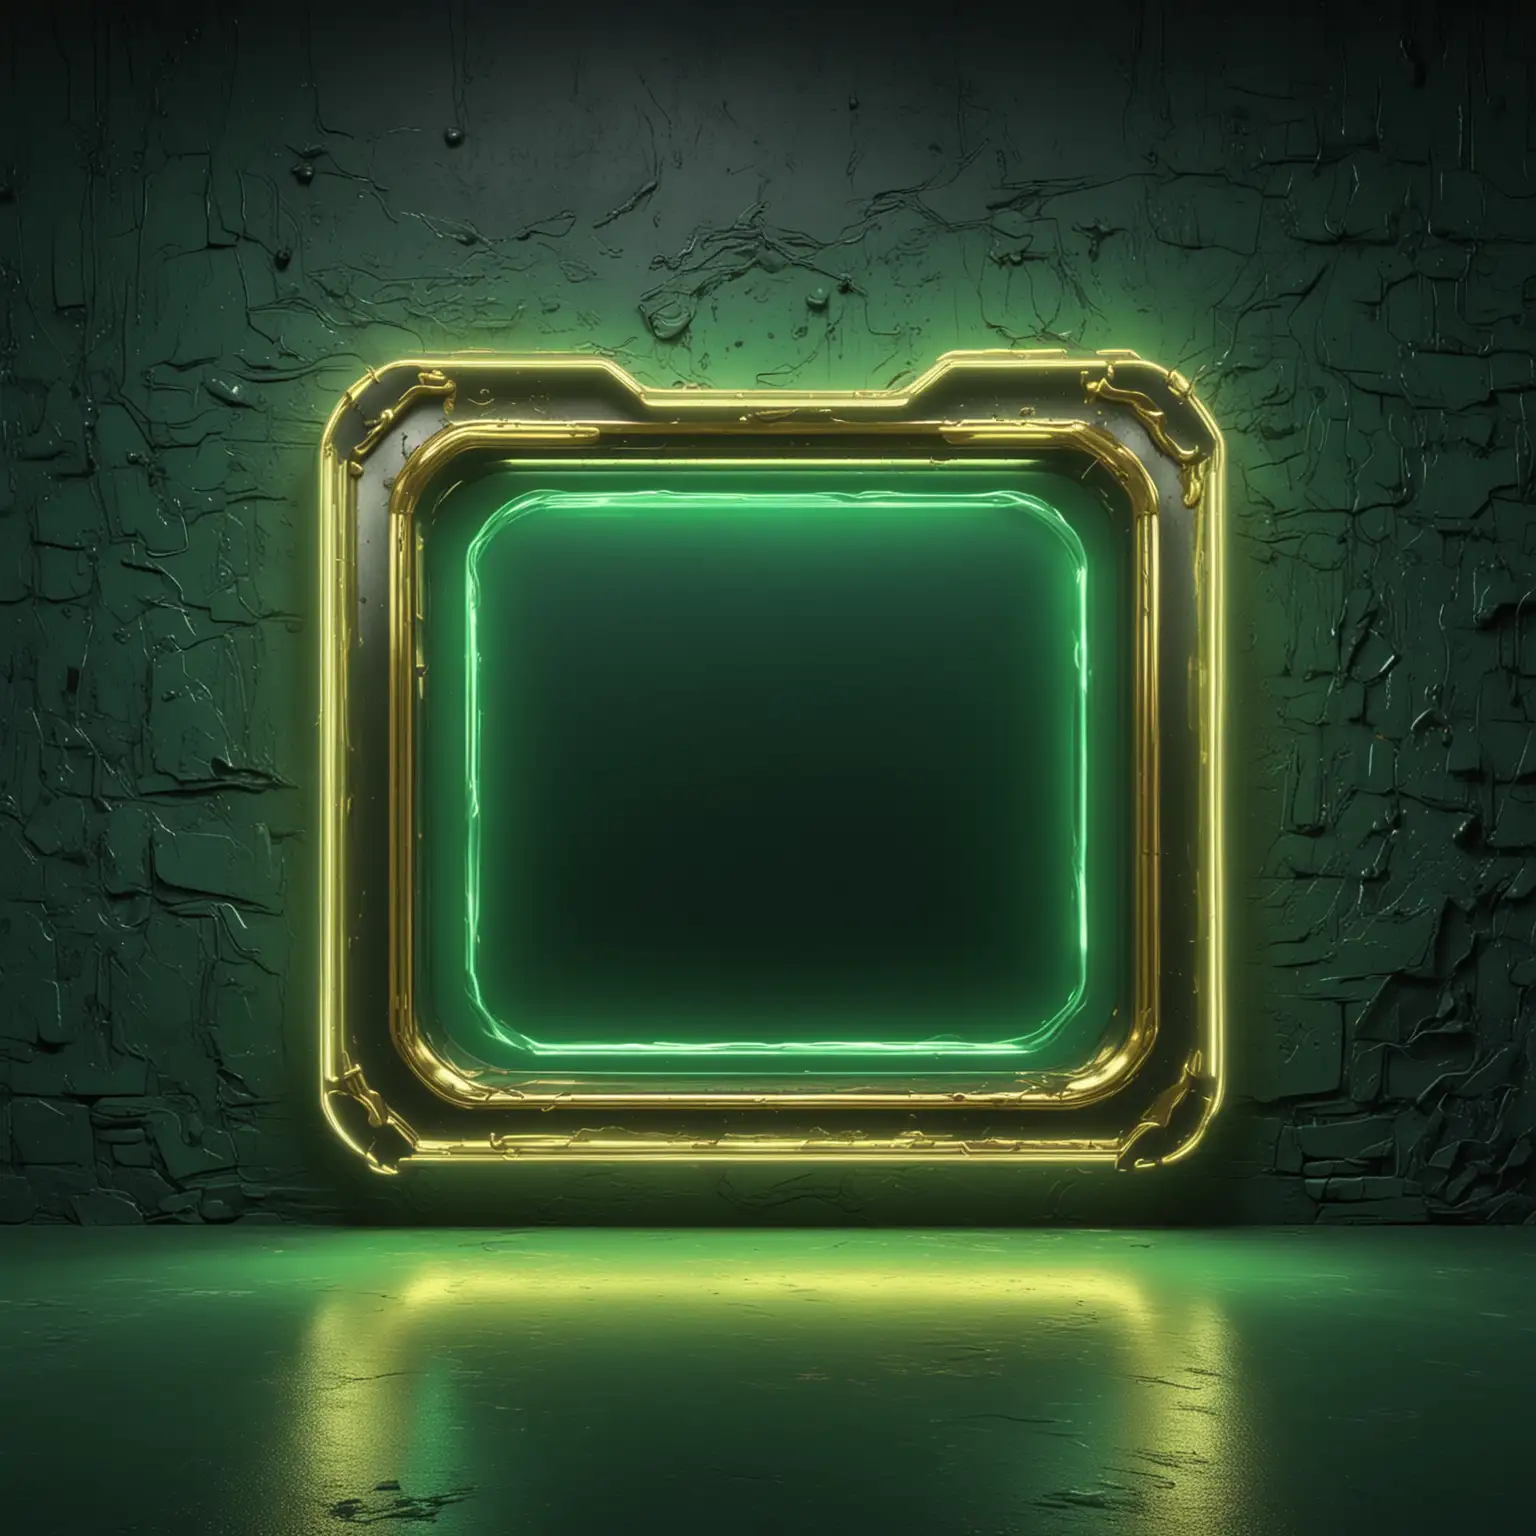 ultra realistic 3d emerald green neon light background with gold metal accents in cinematic lighting